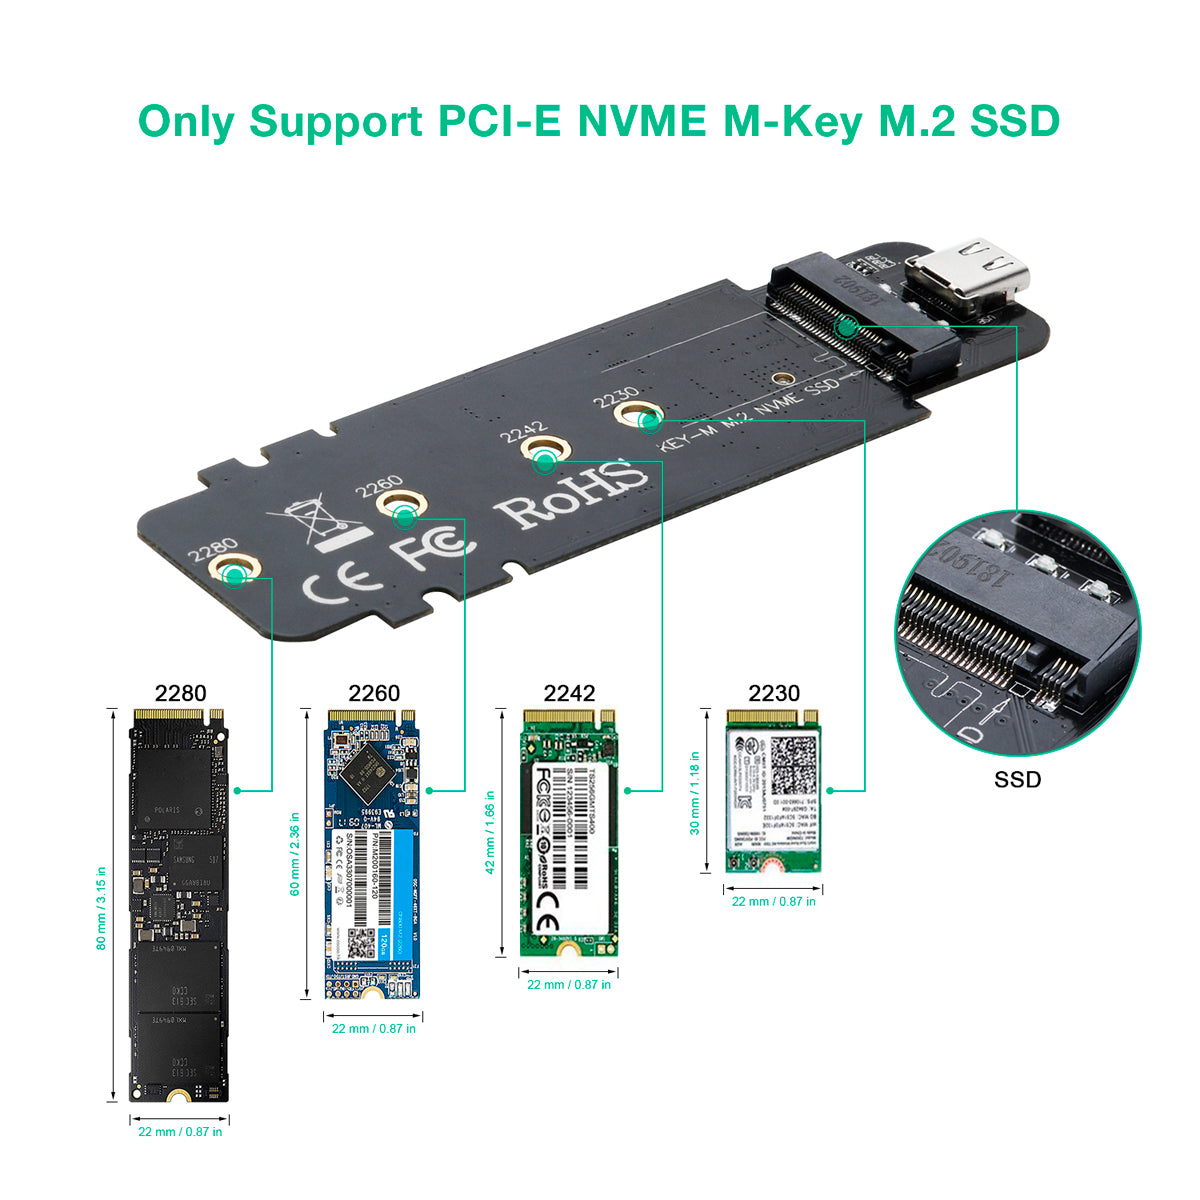 PC-HDE02 M.2 to USB SSD Reader Supports M-Key (PCI-E NVMe-based)